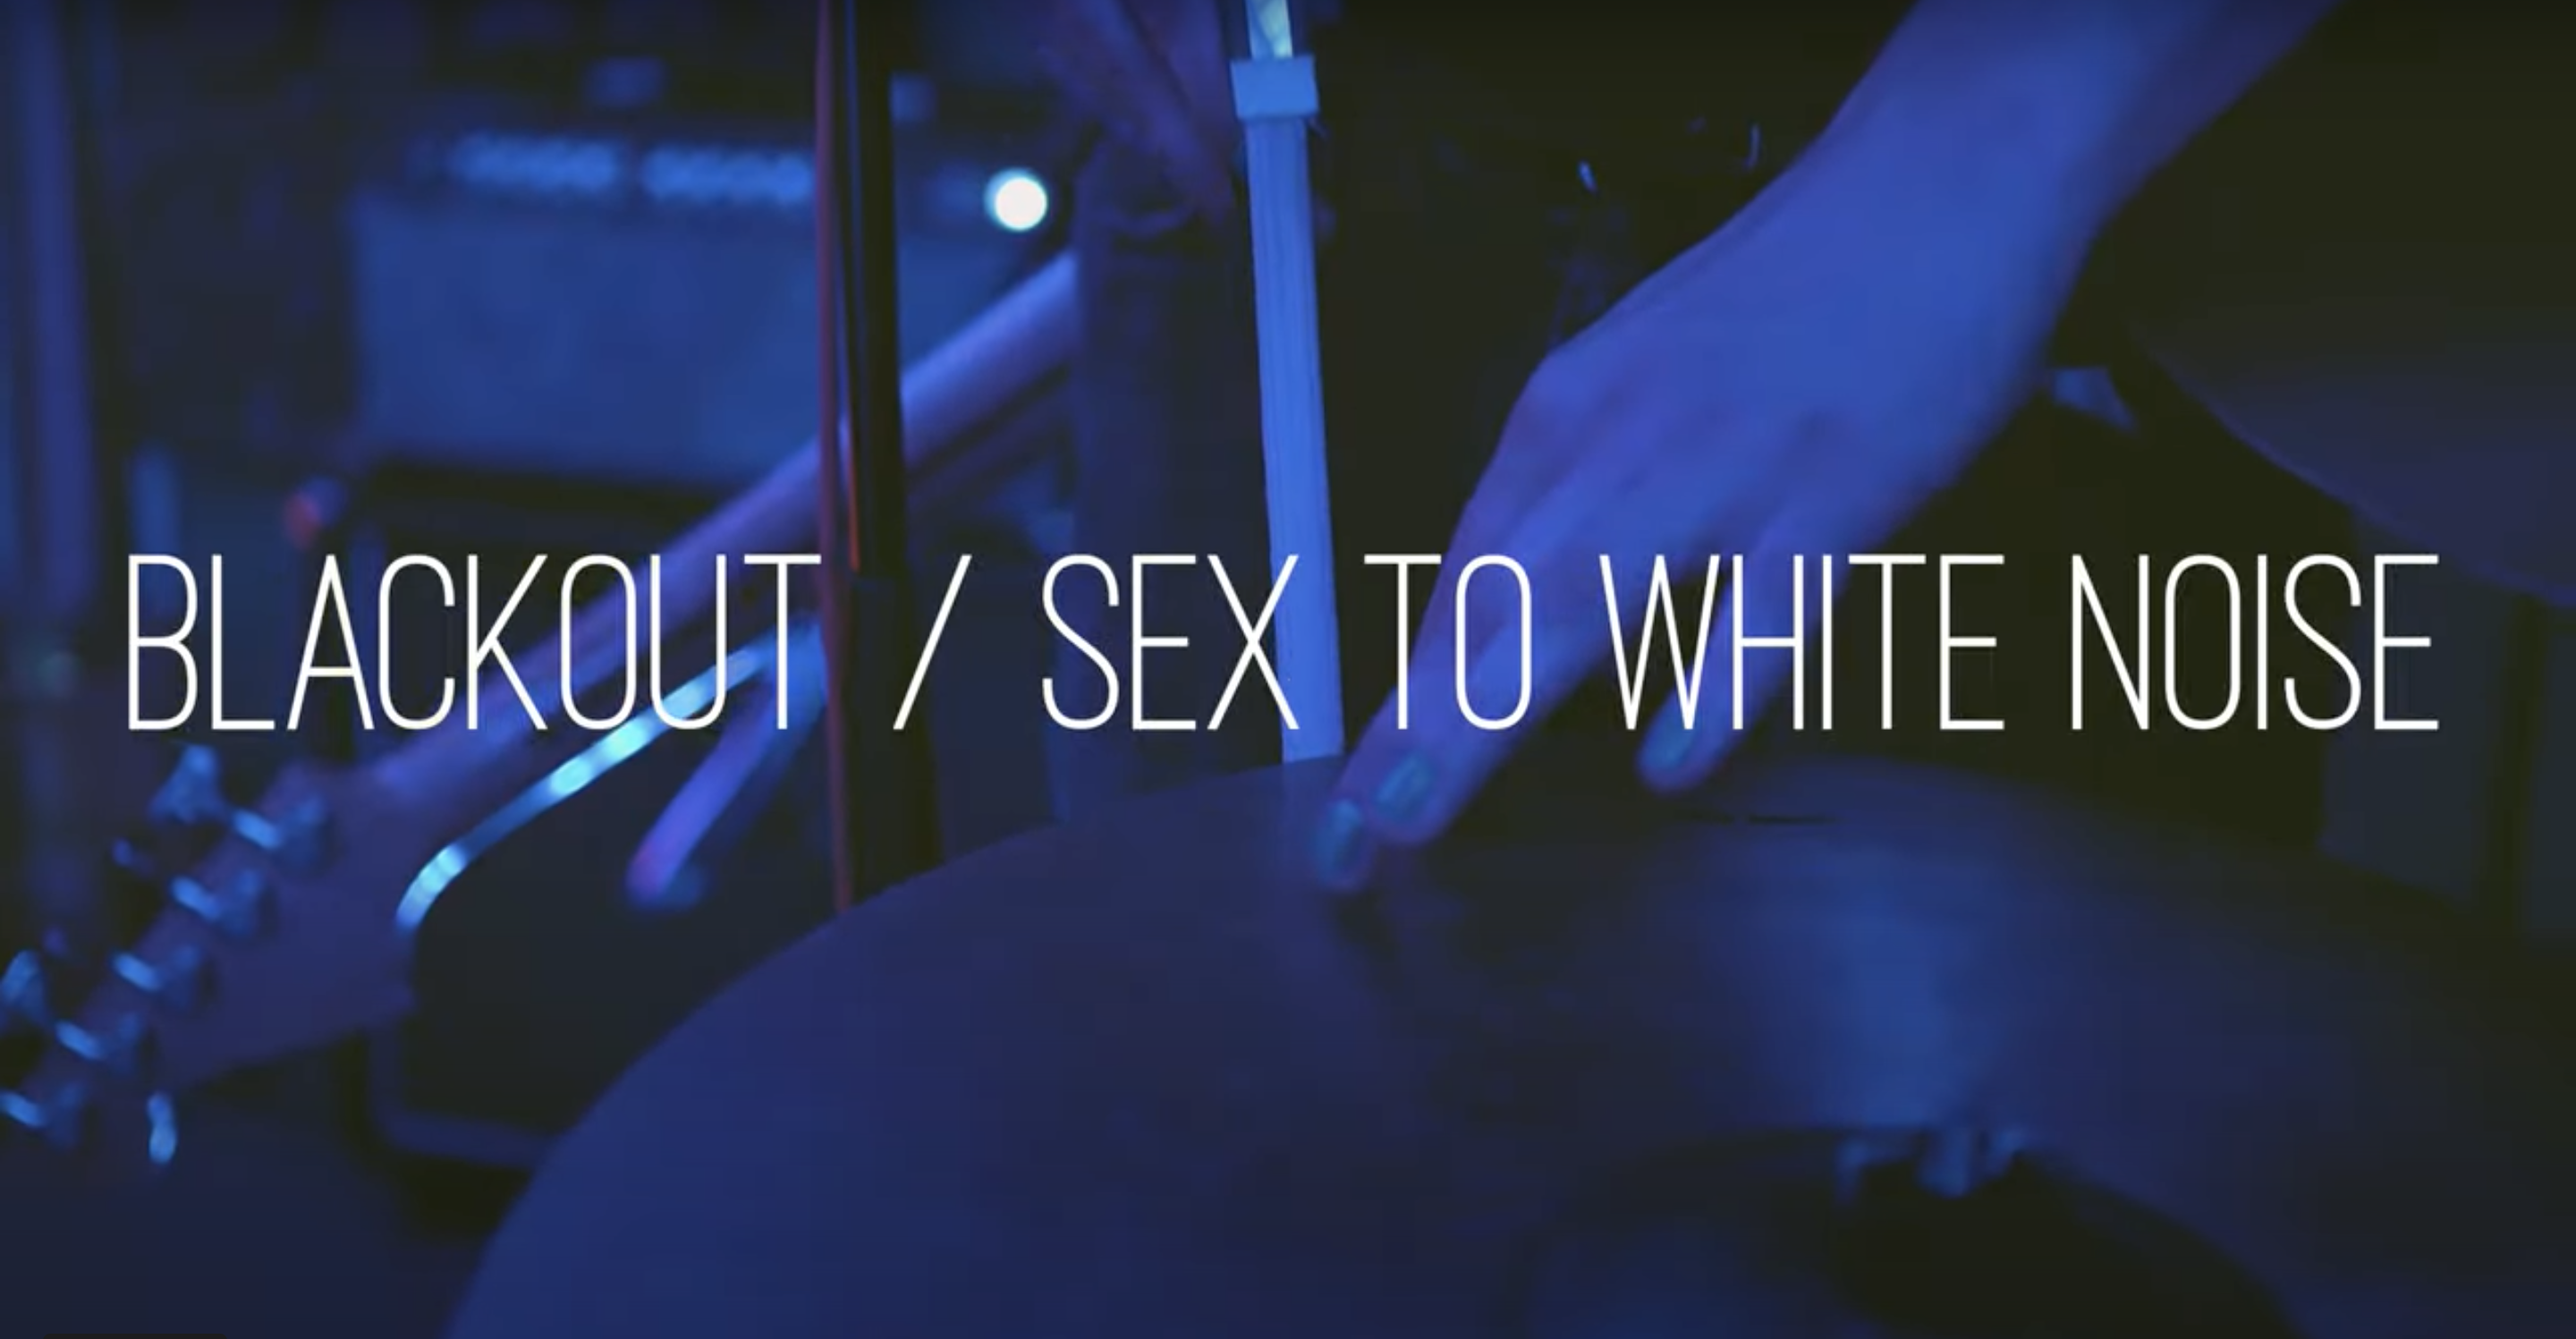 WATCH: “Blackout” & “Sex to White Noise” by Life in Mono